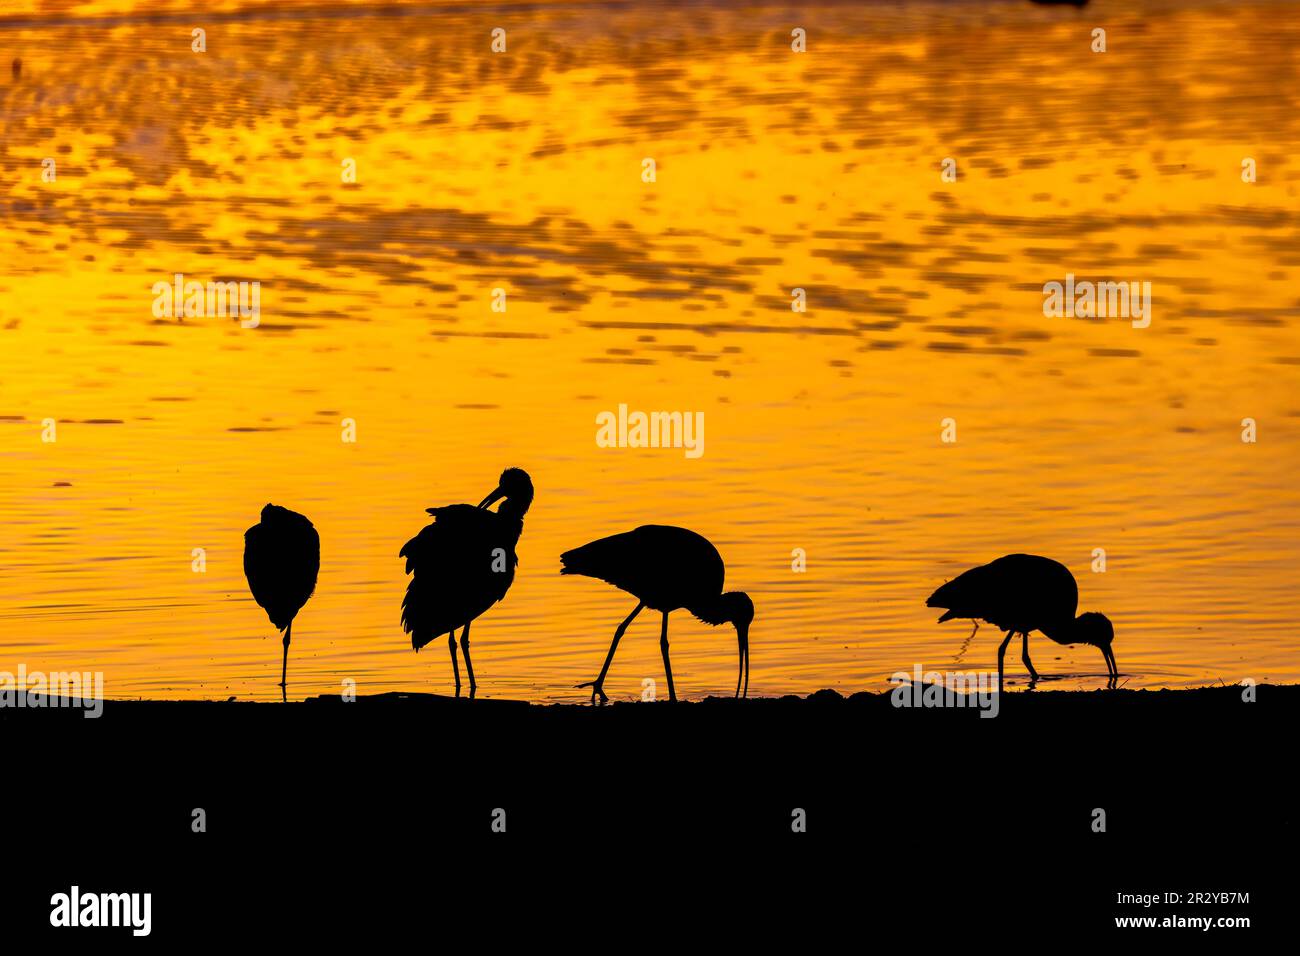 Shorebirds (White-faced ibis) are silhouetted against the setting sun. Stock Photo